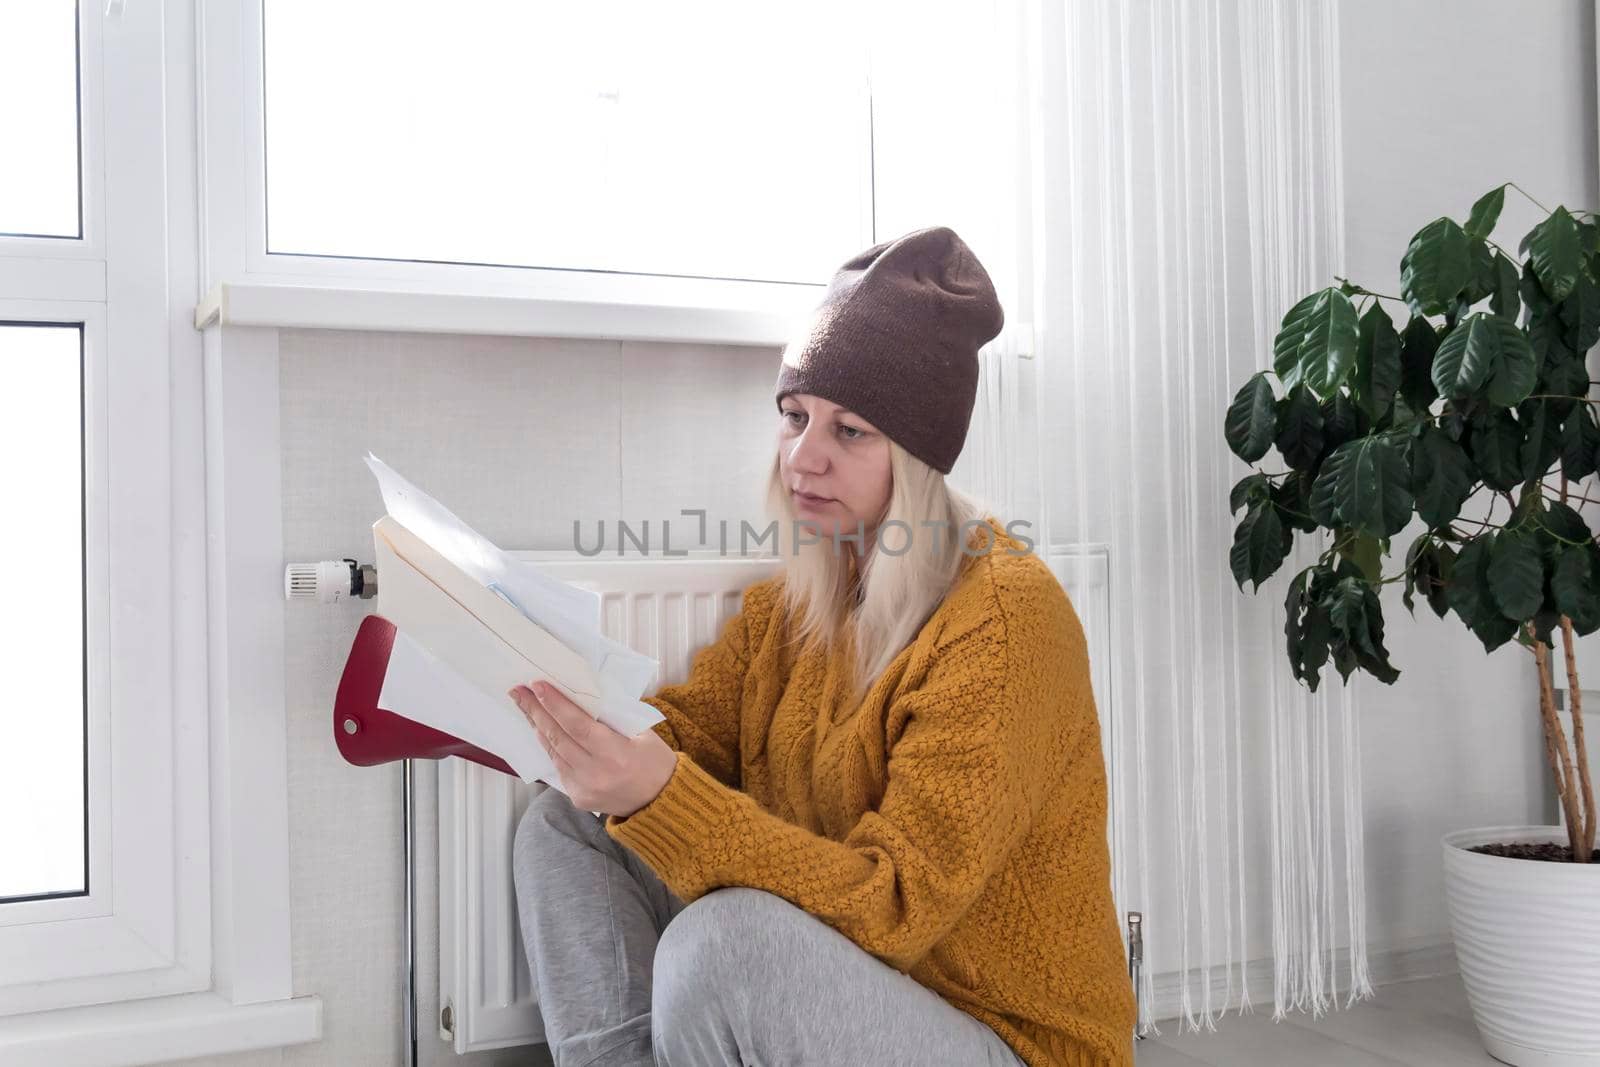 A young girl in a yellow sweater and a brown hat is sitting on the floor, counting money and thinking how to pay bills and taxes near a heater with a thermostat..